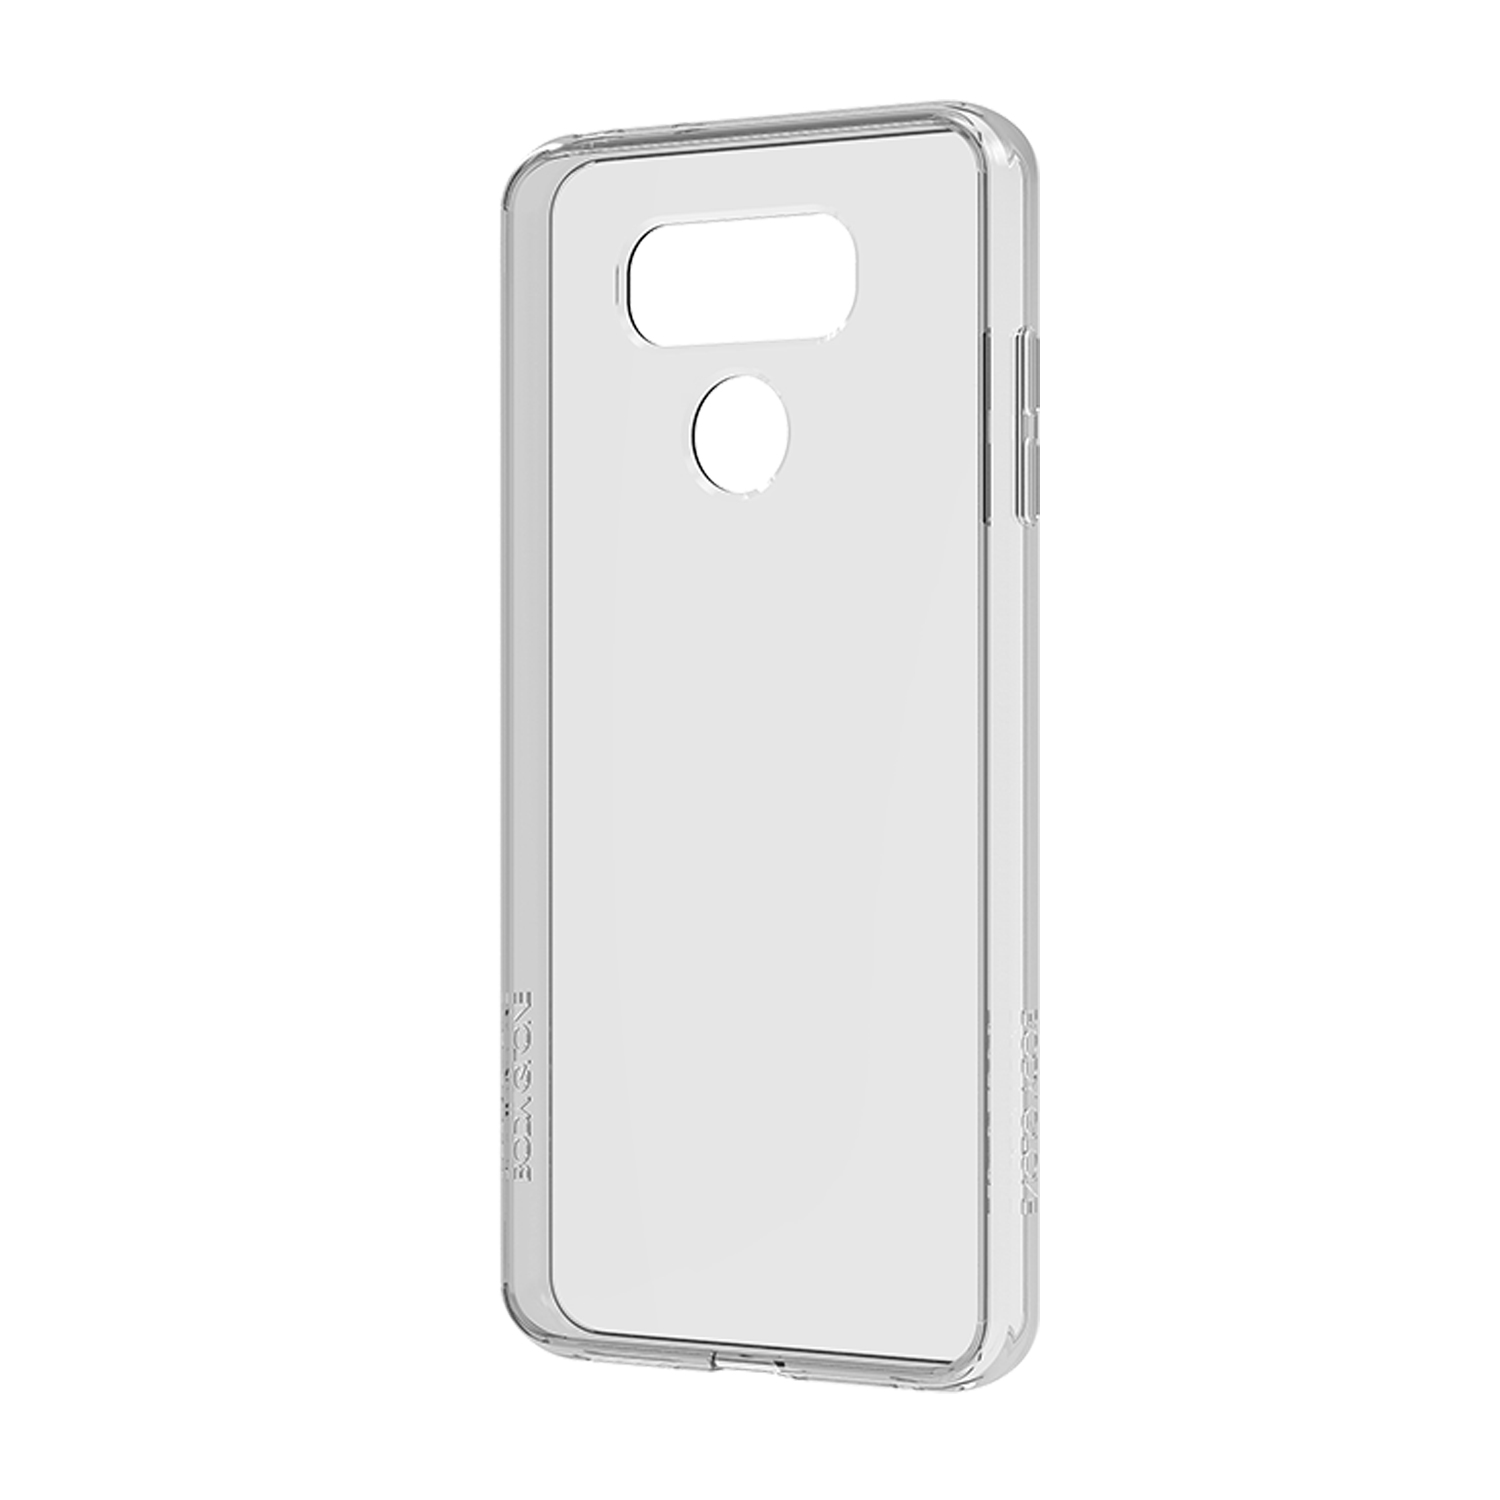 Body Glove Ghost Case for LG G6 - Clear